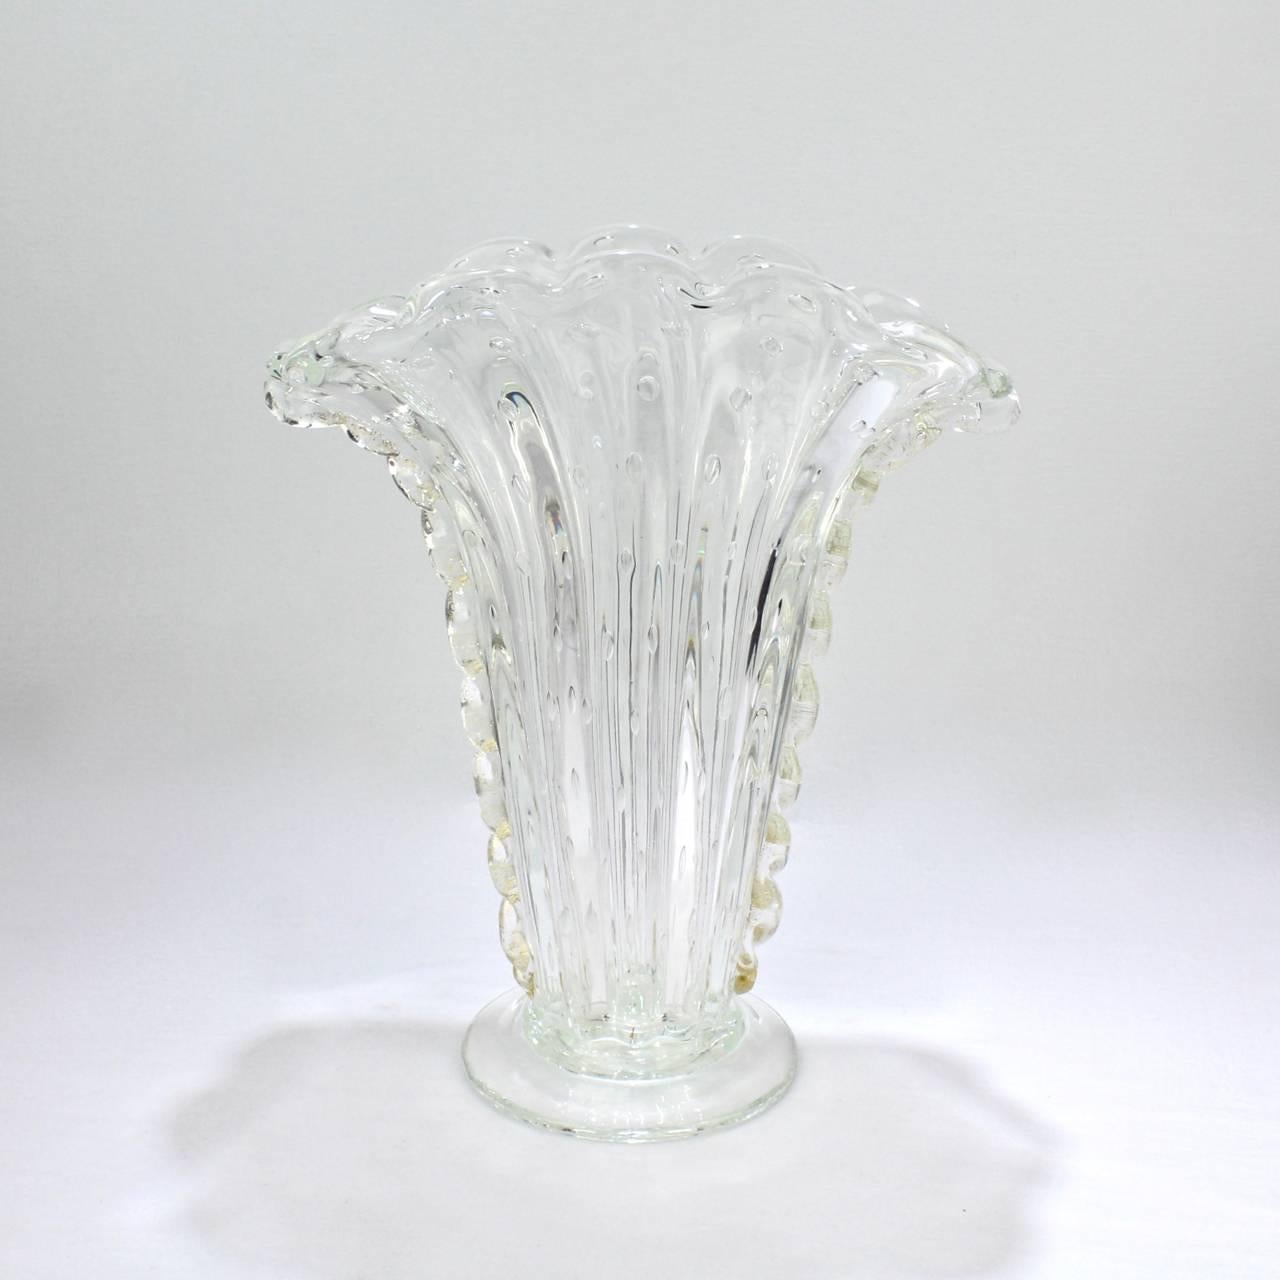 A wonderful, large-scale Italian glass Bullicante fan shaped flower vase.

Attributed to Barovier and Toso.

In clear glass with captured bubbles, gold foil inclusions, and a polished pontil mark to the base.

Measures: Height ca. 11 1/8